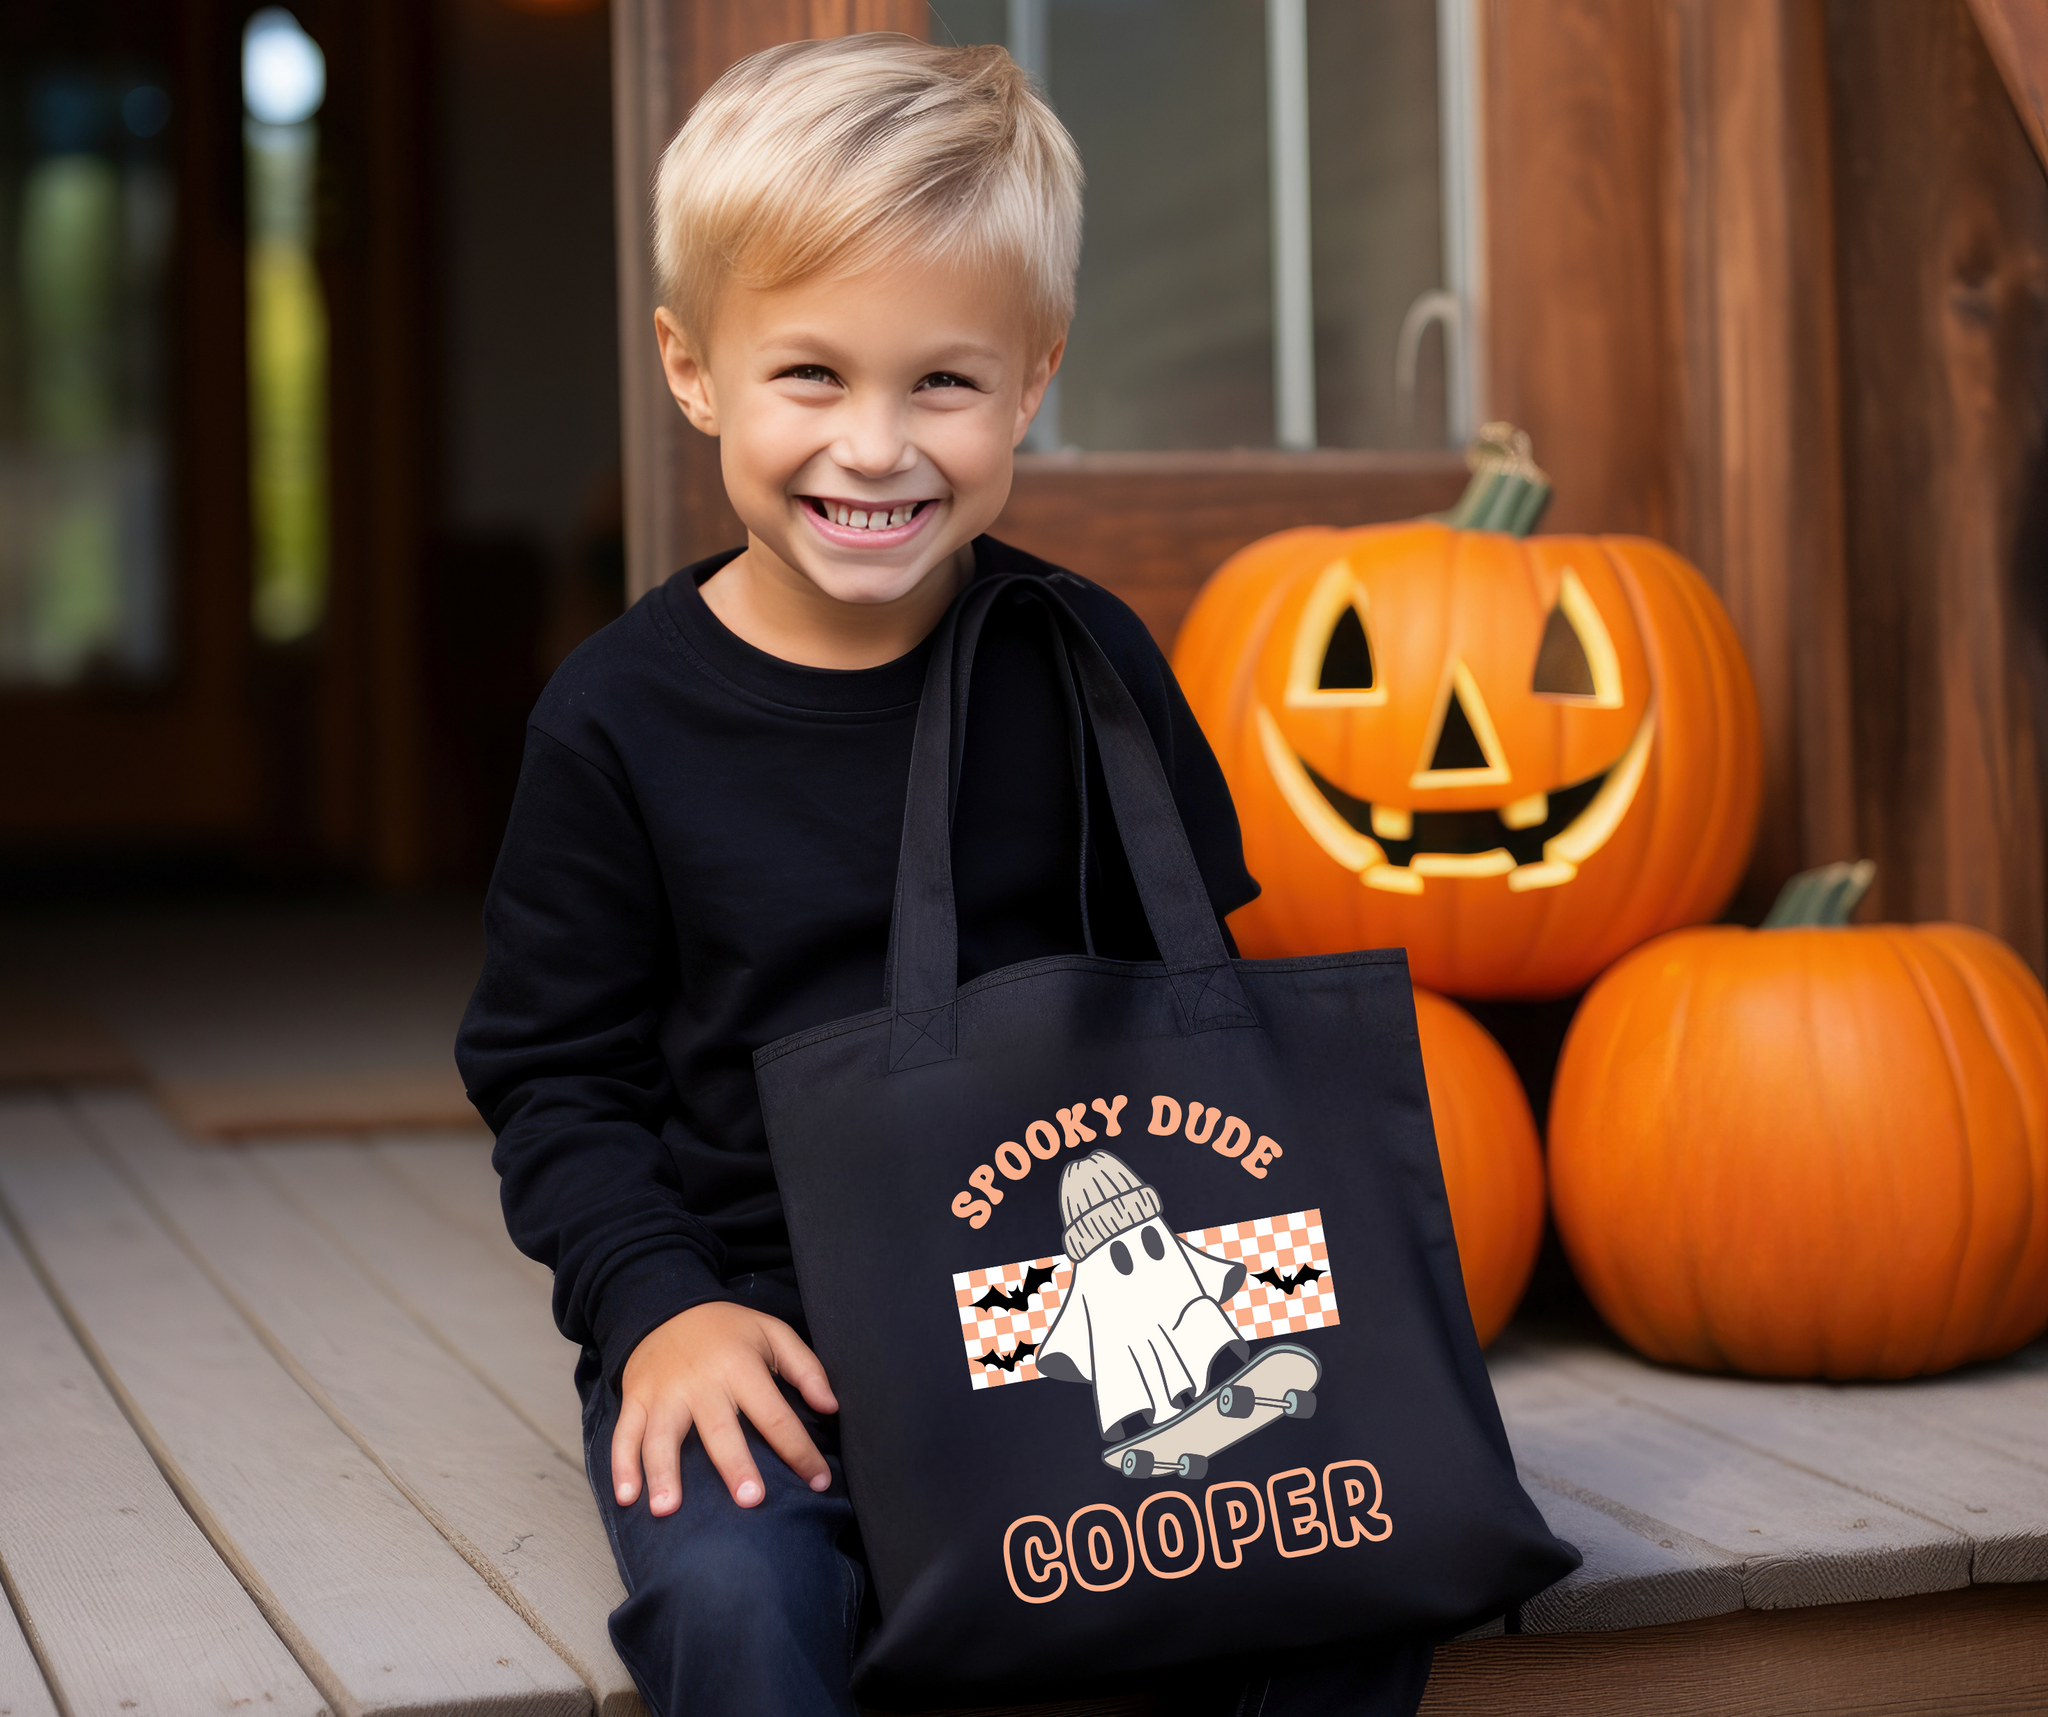 Spooky Dude Ghost Trick-or-Treat Bag